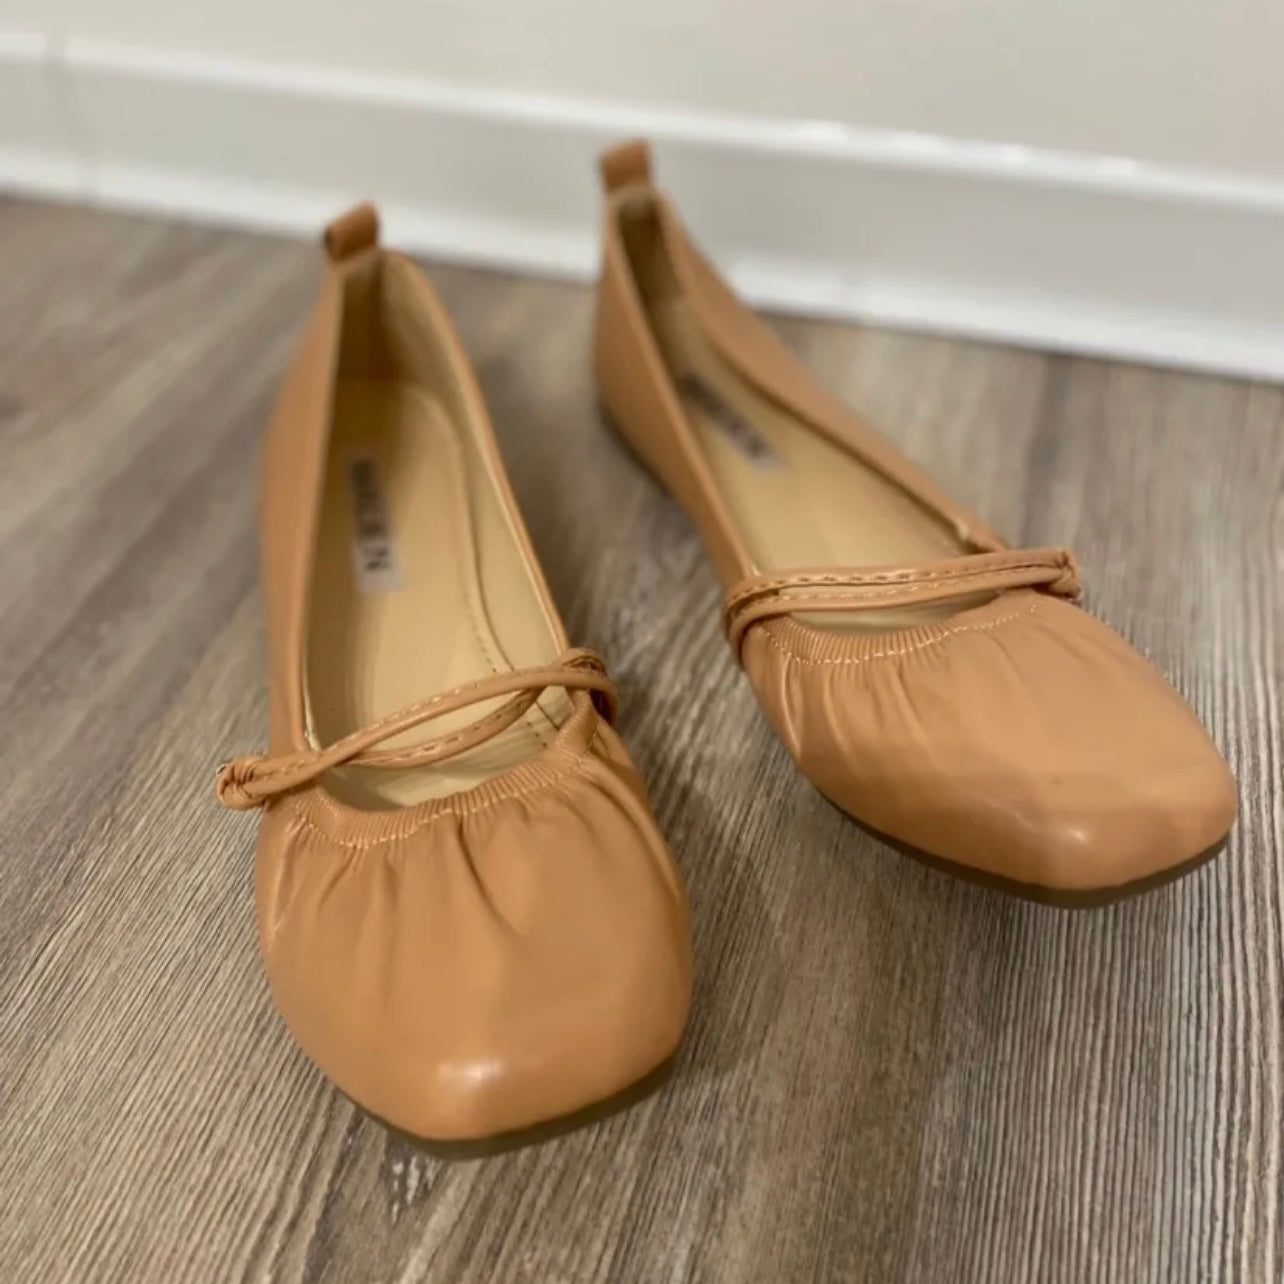 MALIEN BEIGE BALLERINAS WITH SQUARE TOES